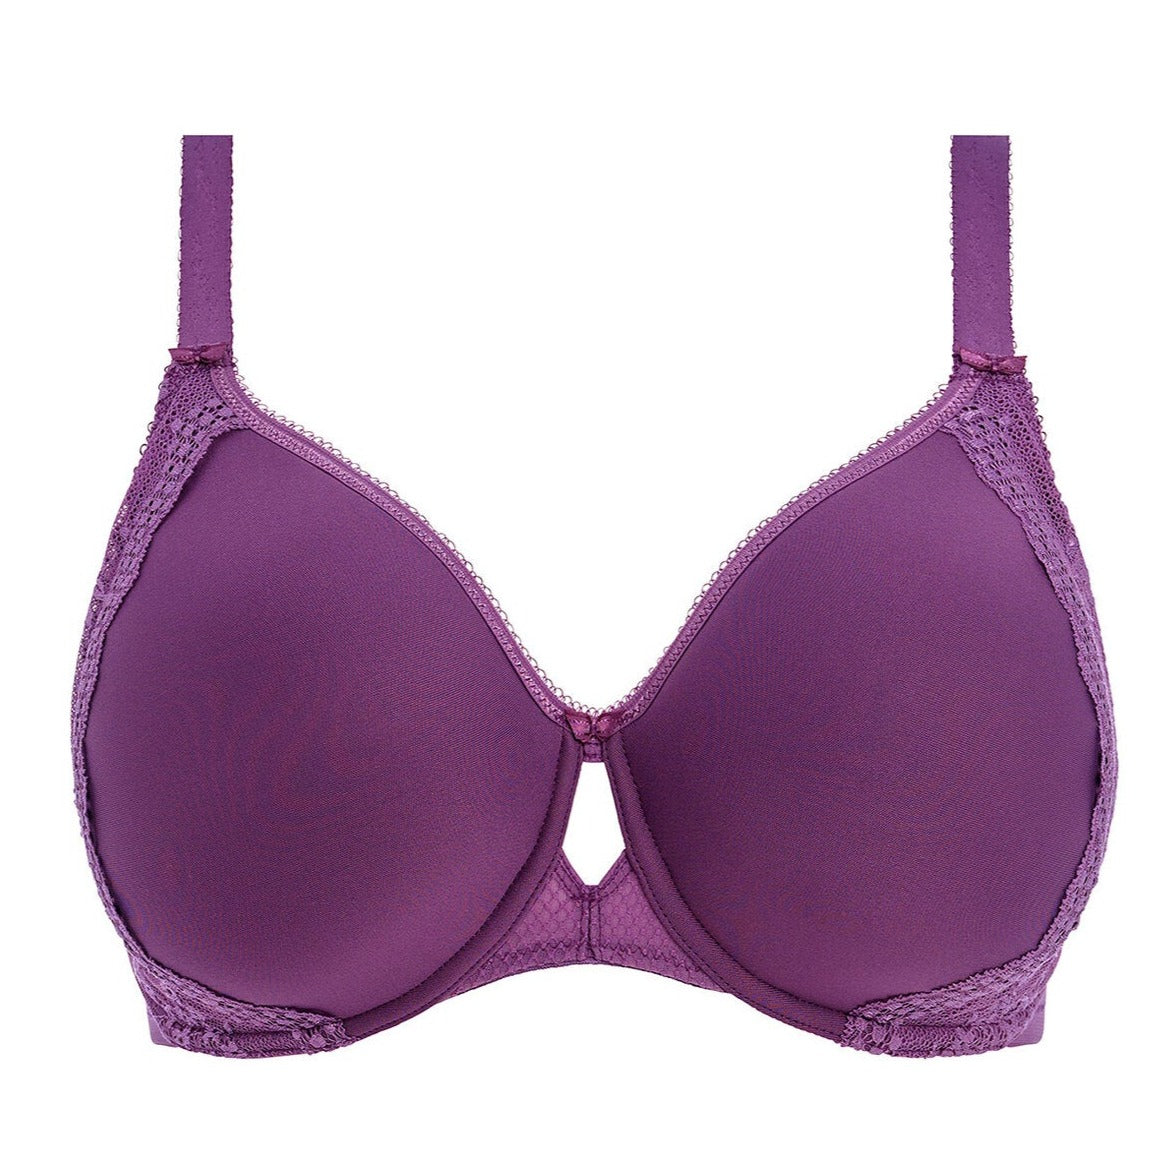 Elomi Charley Underwire Bandless Spacer Moulded Bra